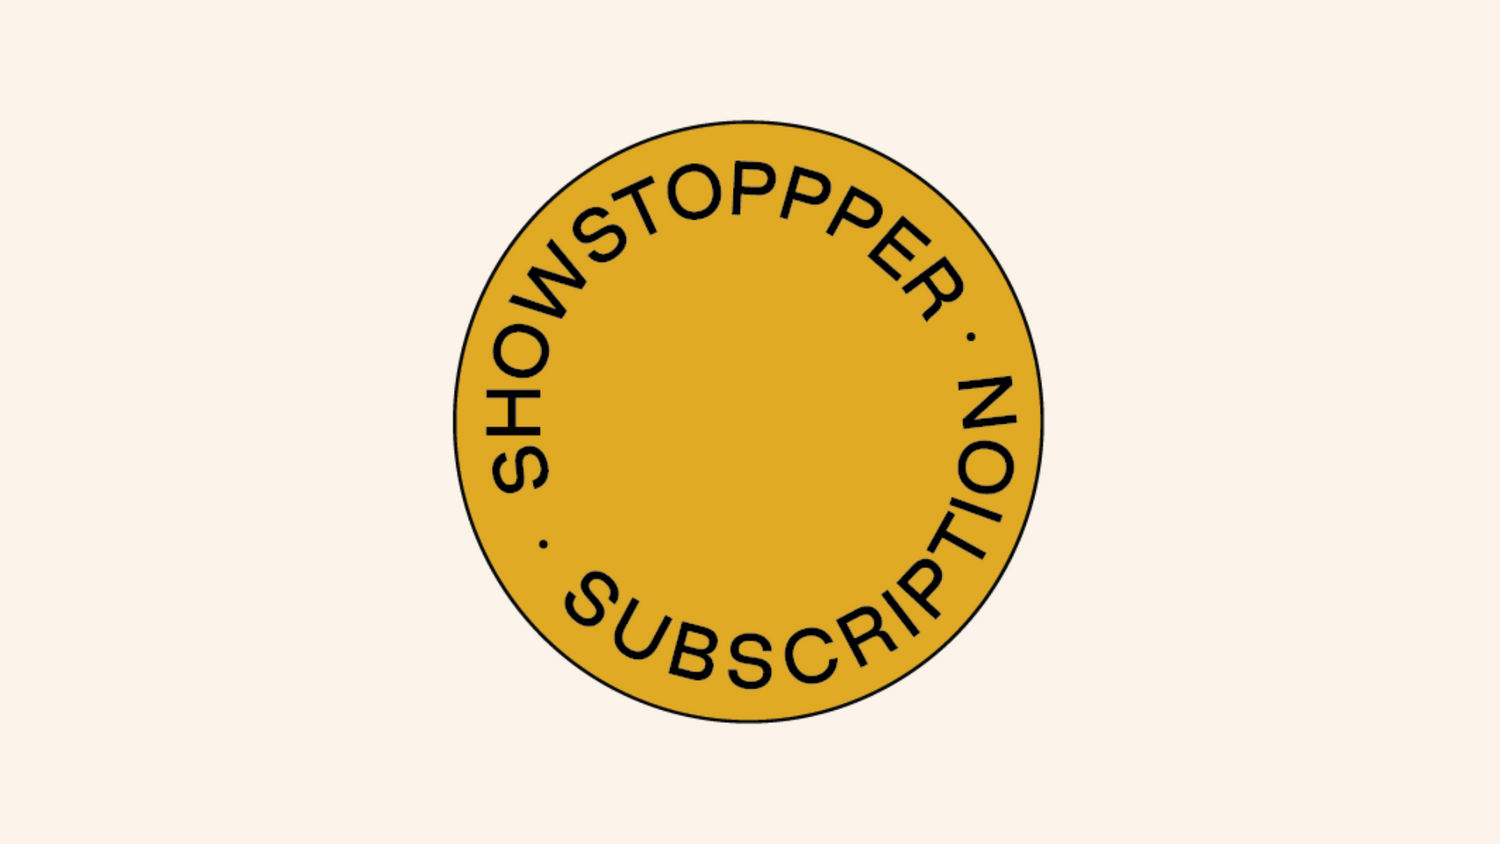 Introducing Climpsons Showstopper Sub(scription) Club...